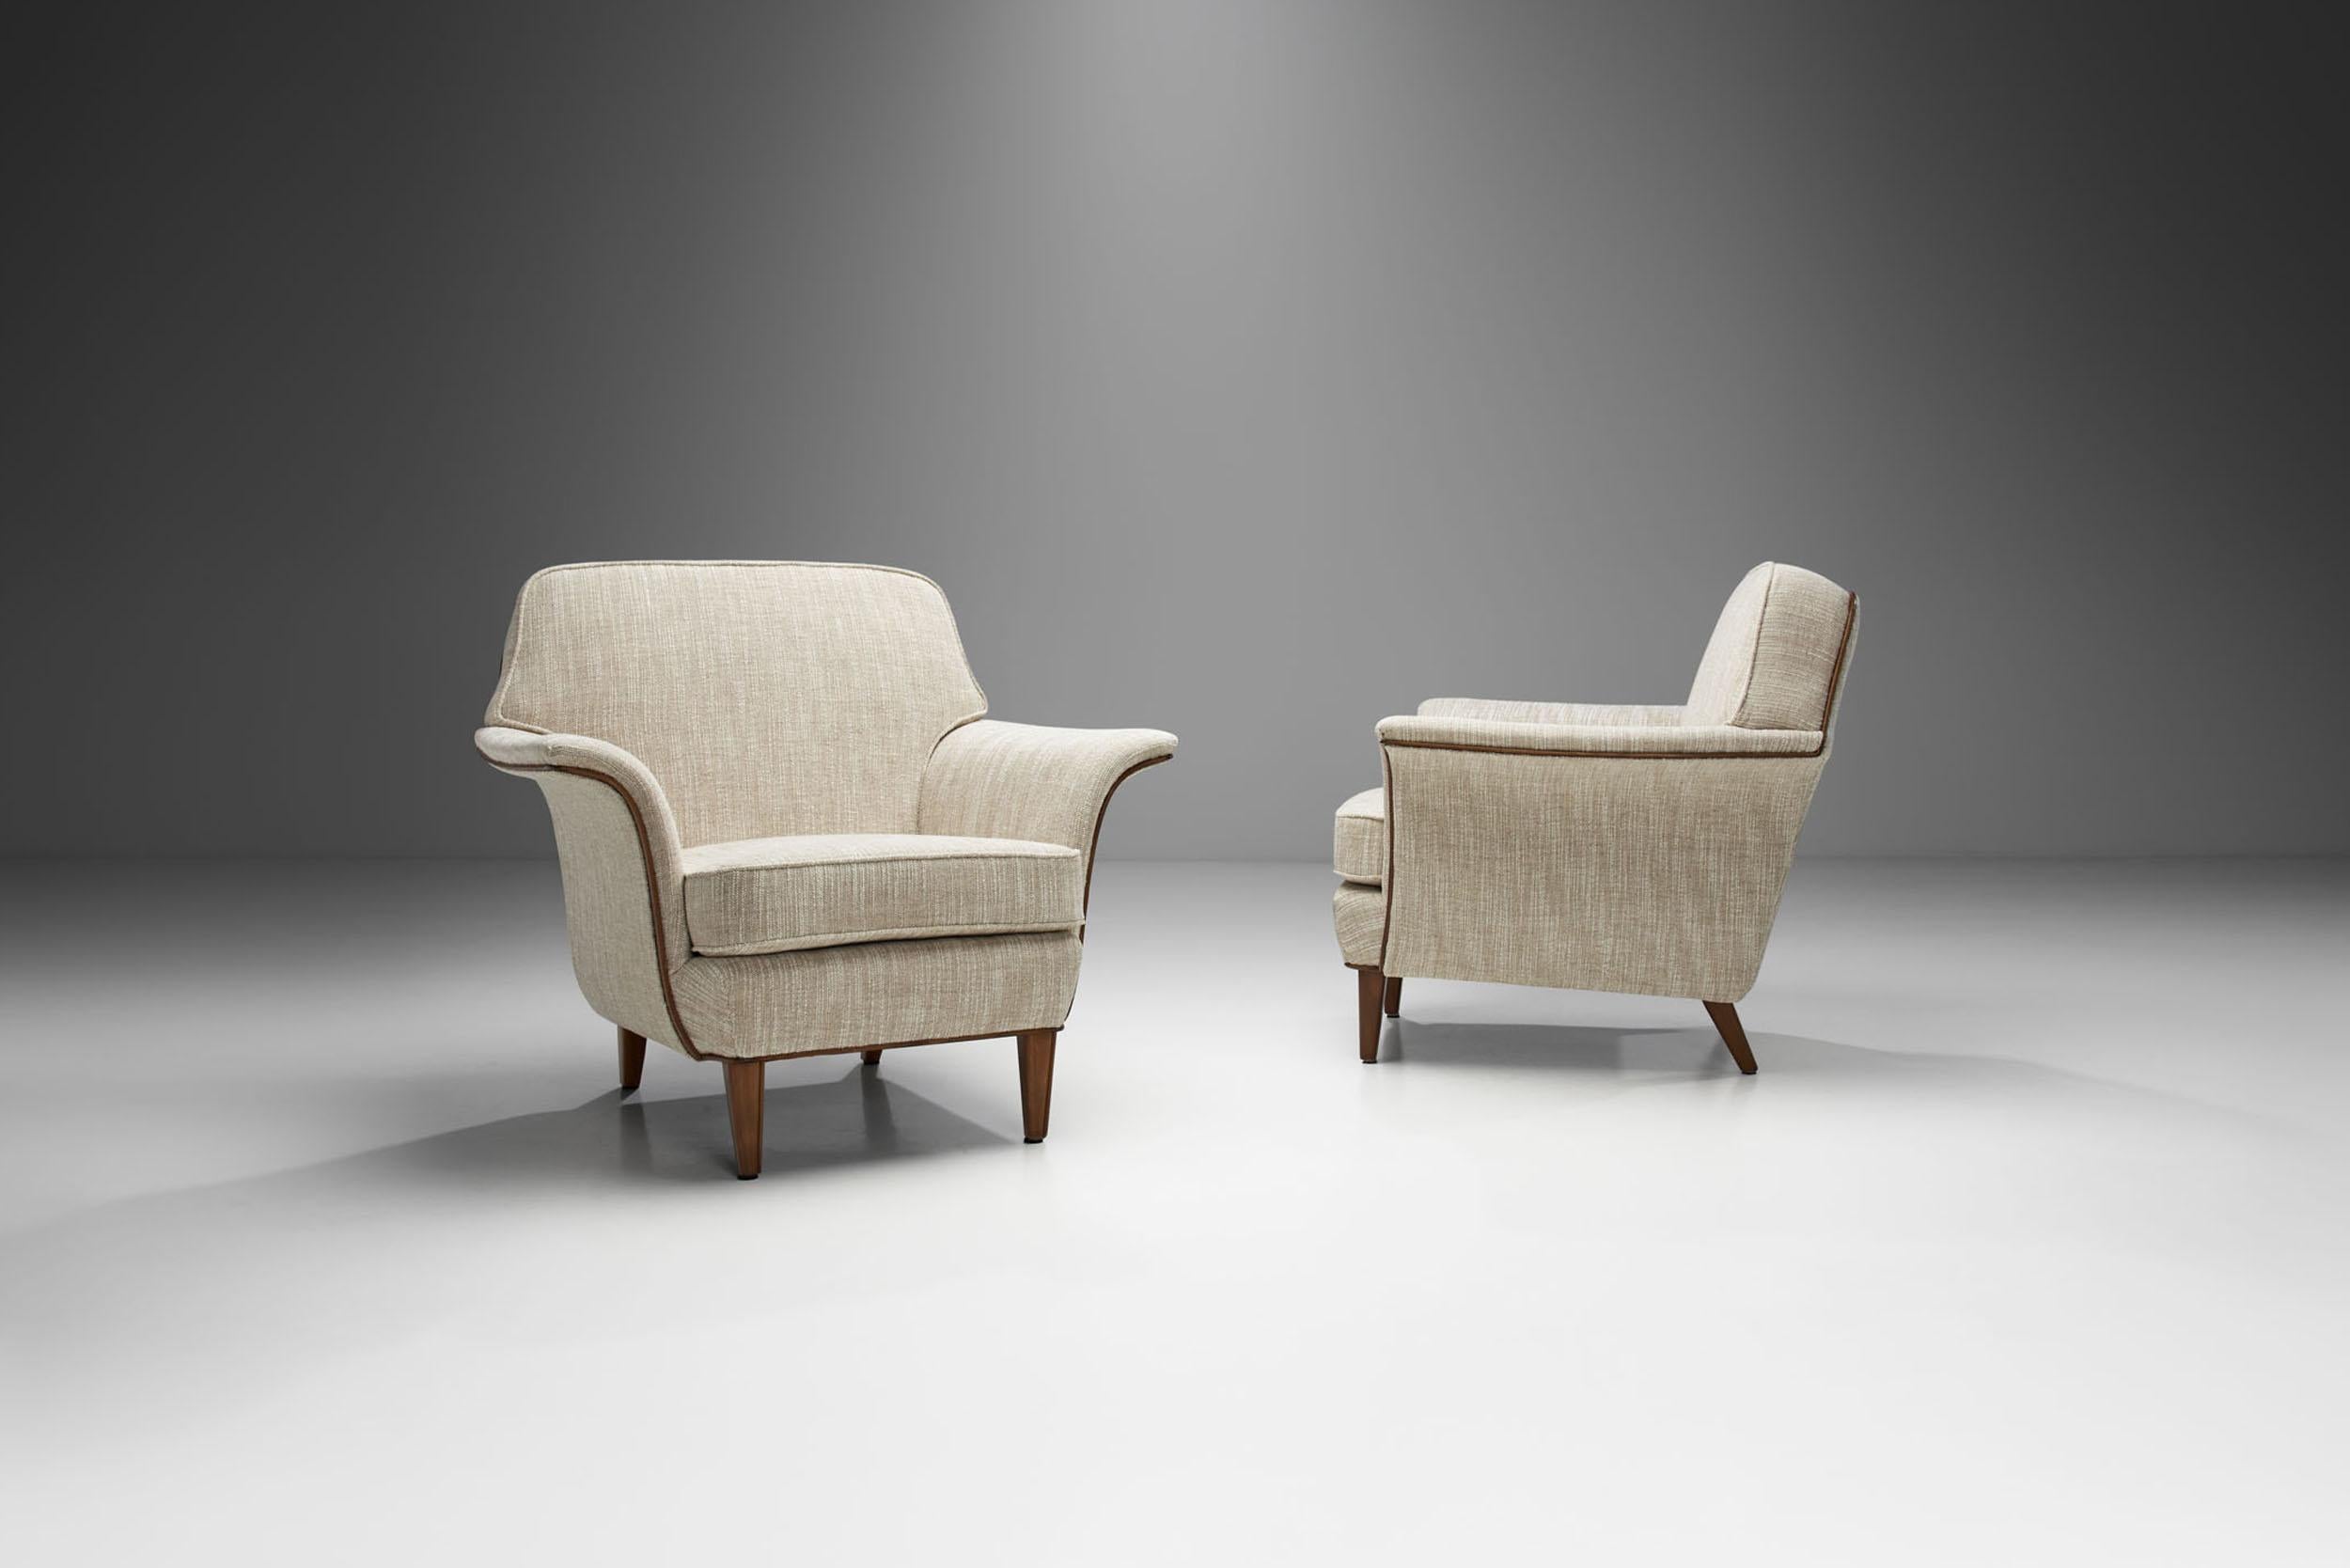 Mid-20th Century Swedish Mid-Century Cabinetmaker Armchairs, Sweden 1950s For Sale